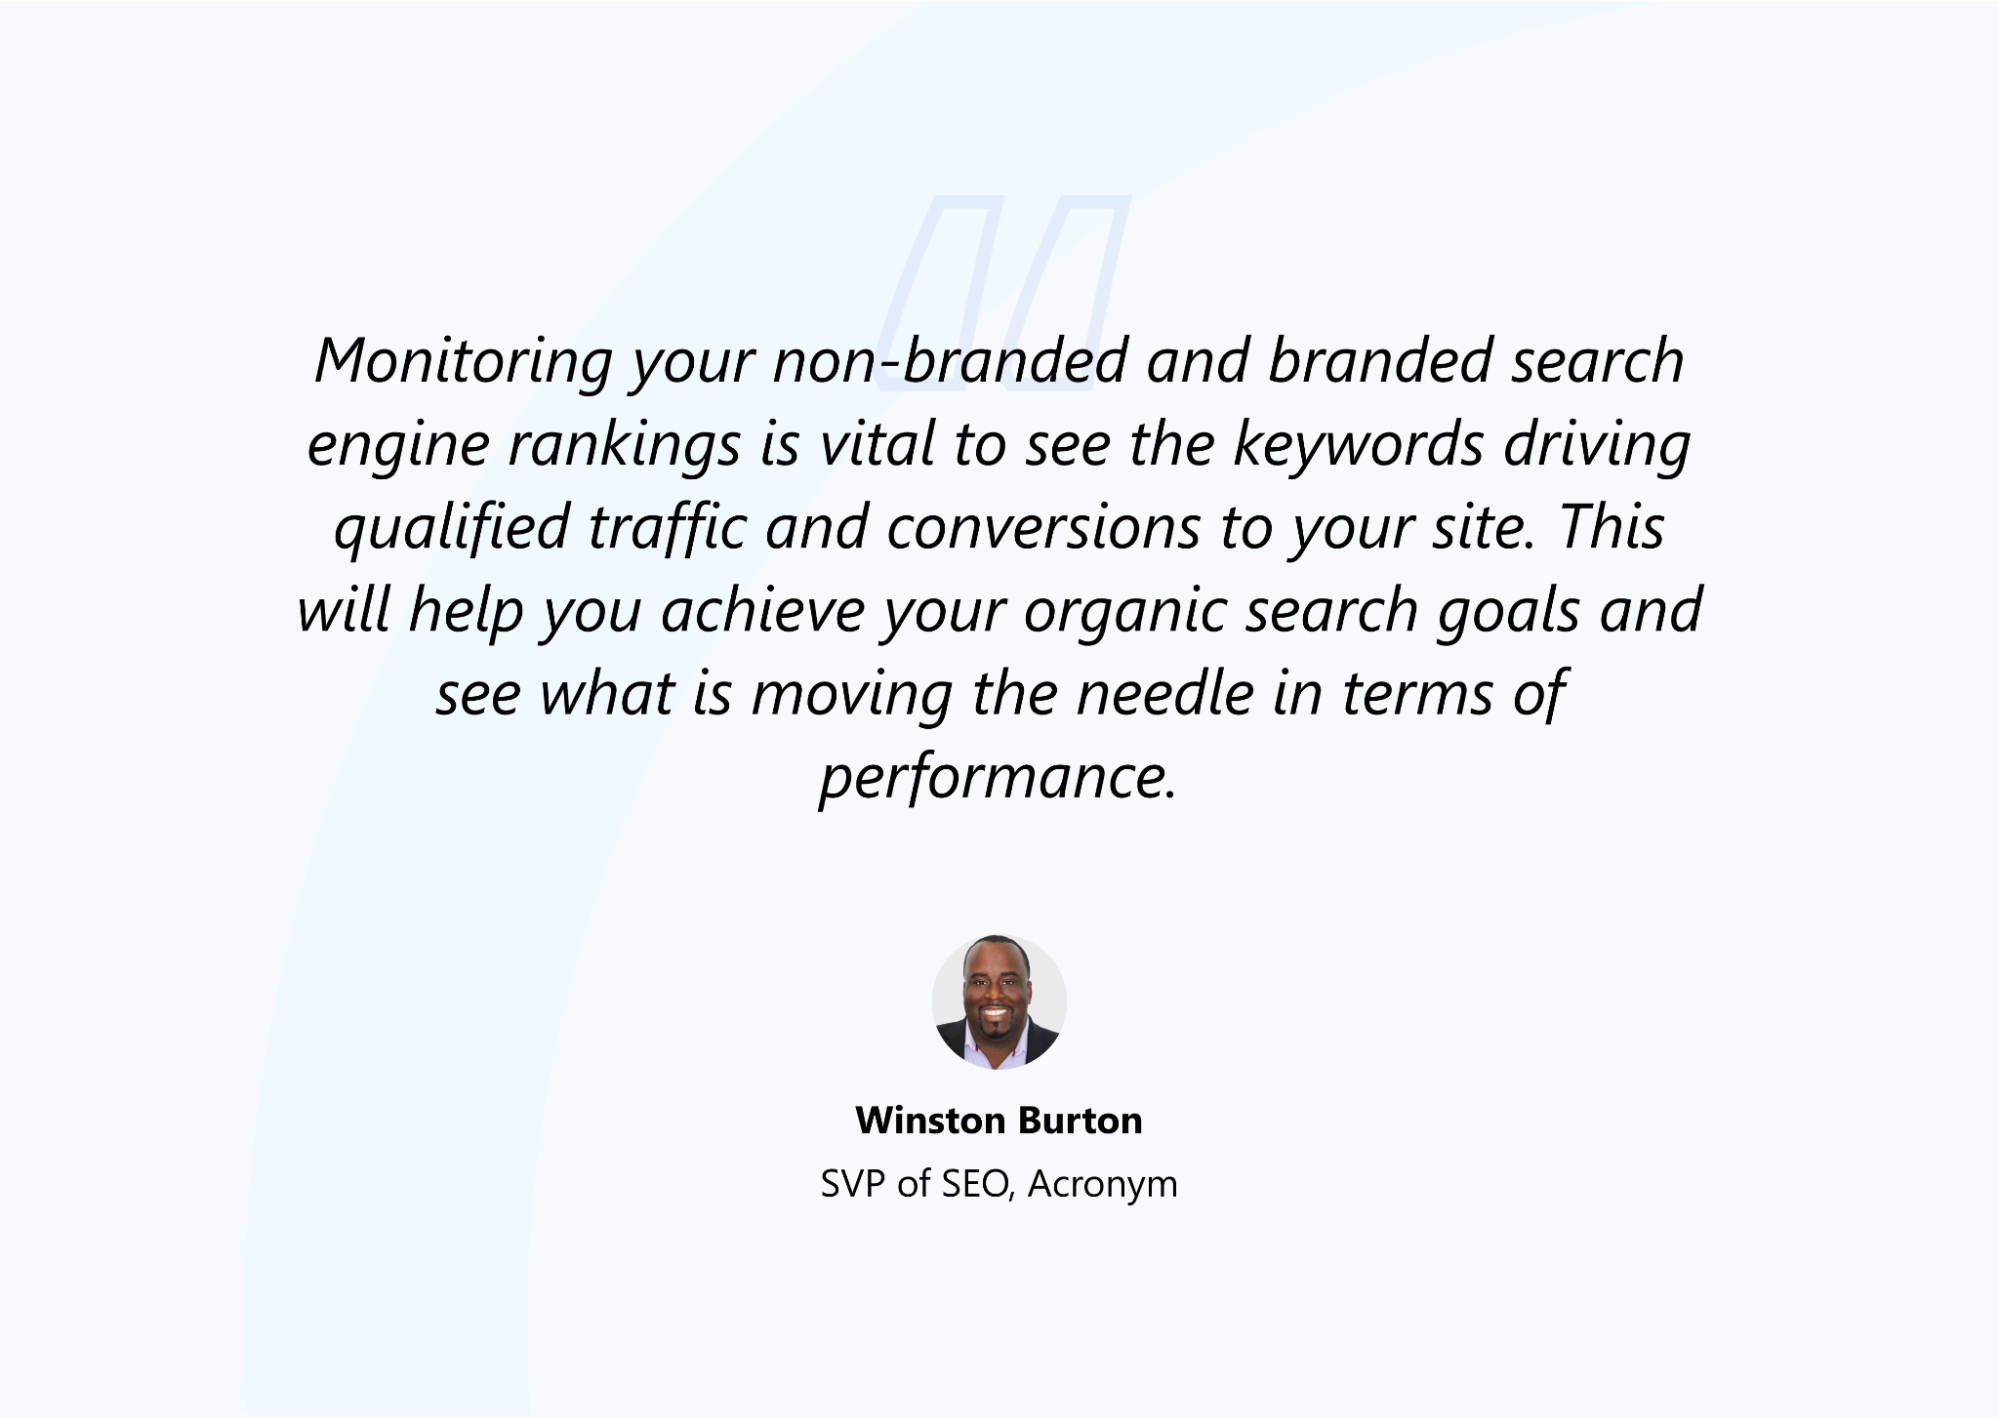 Achieving Organic Search Goals By Monitoring Non-branded and Branded Search Engine Rankings